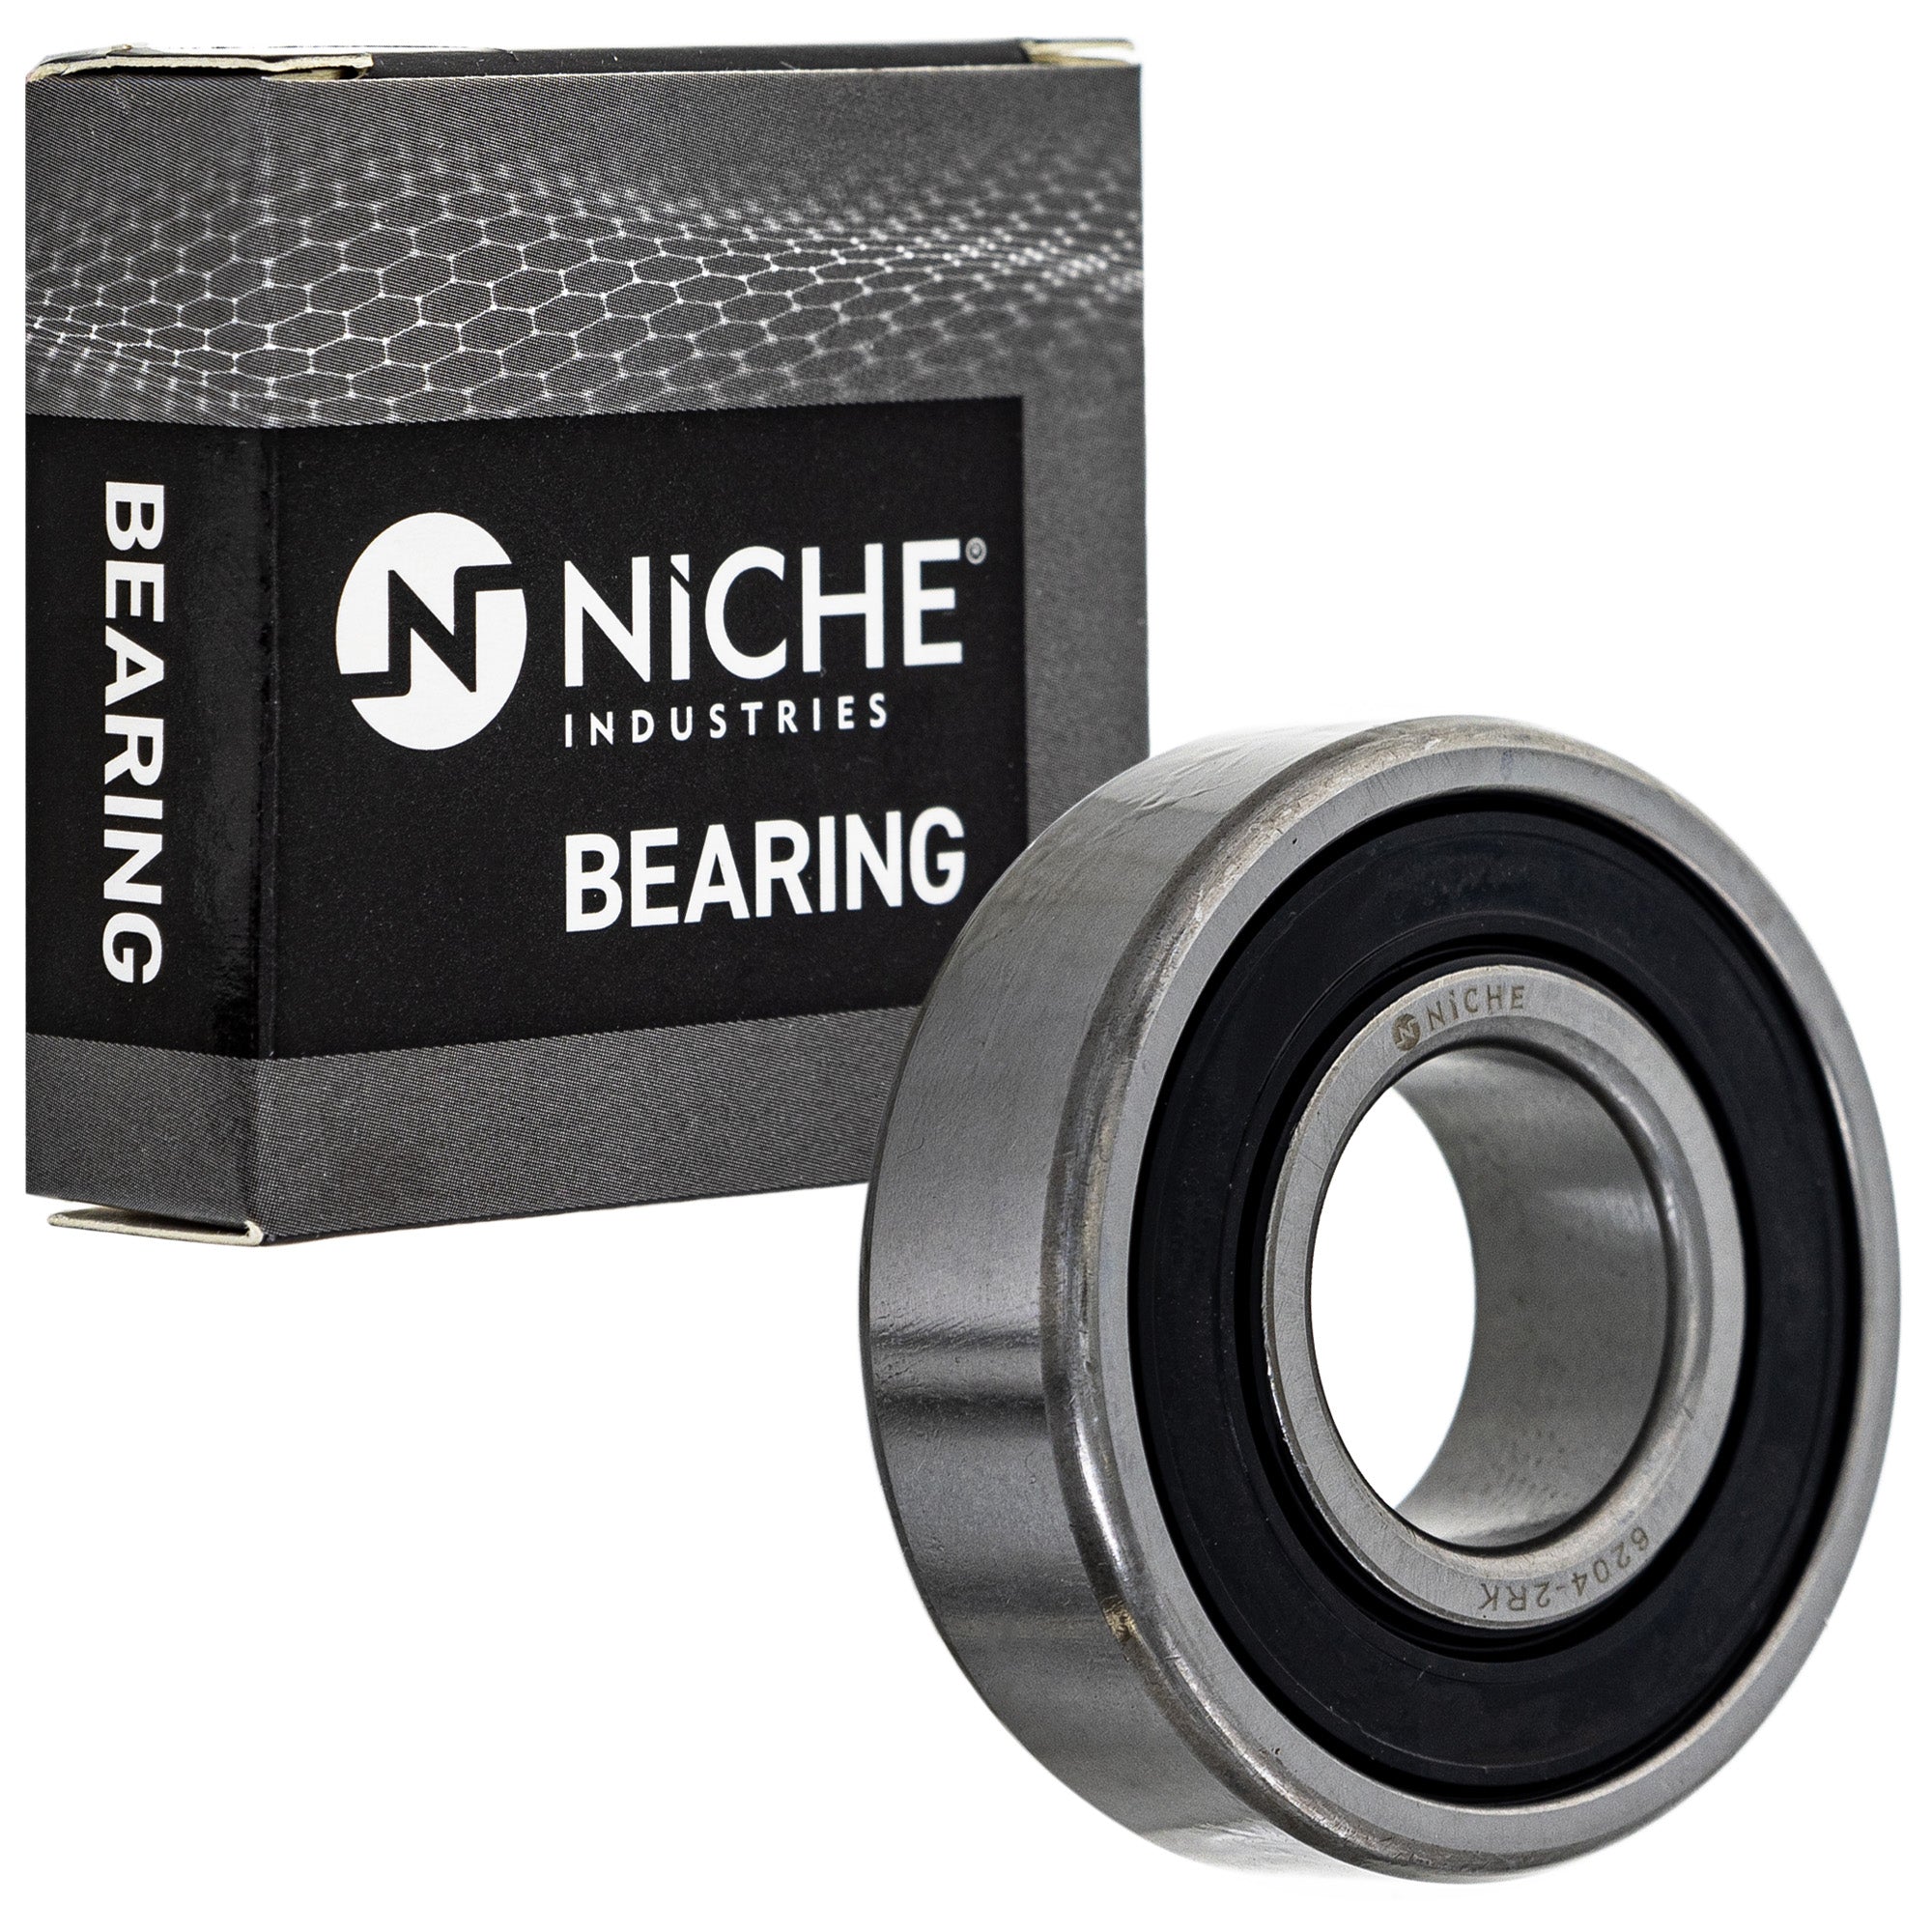 NICHE 519-CBB2281R Bearing 2-Pack for zOTHER VFR750R TRX200 SV650S